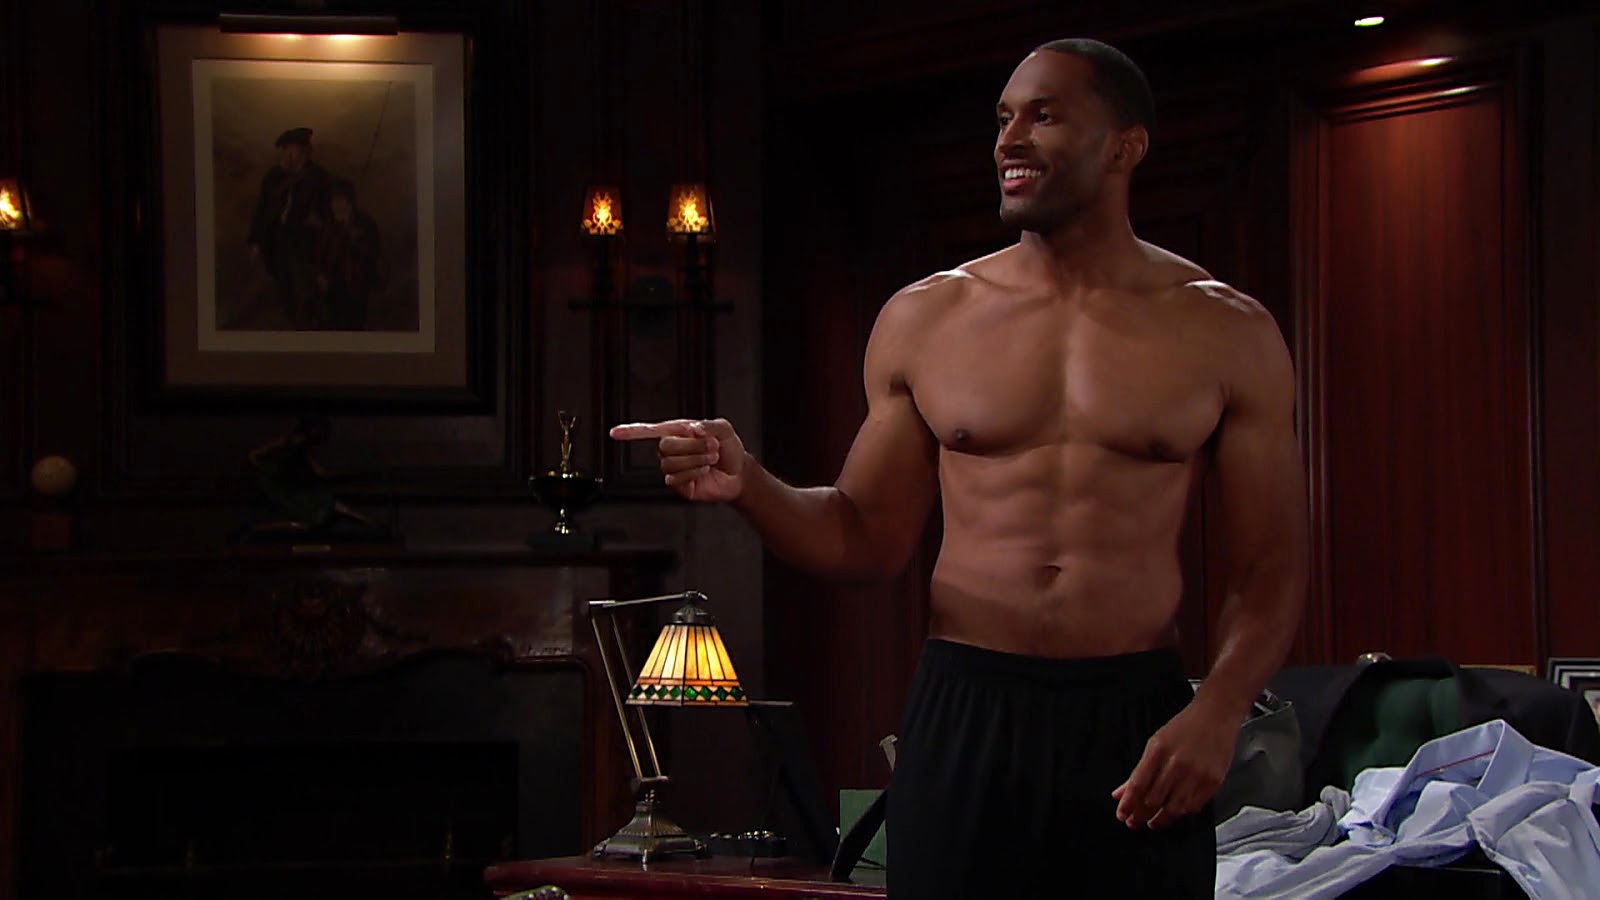 Lawrence Saint Victor sexy shirtless scene August 25, 2020, 9am